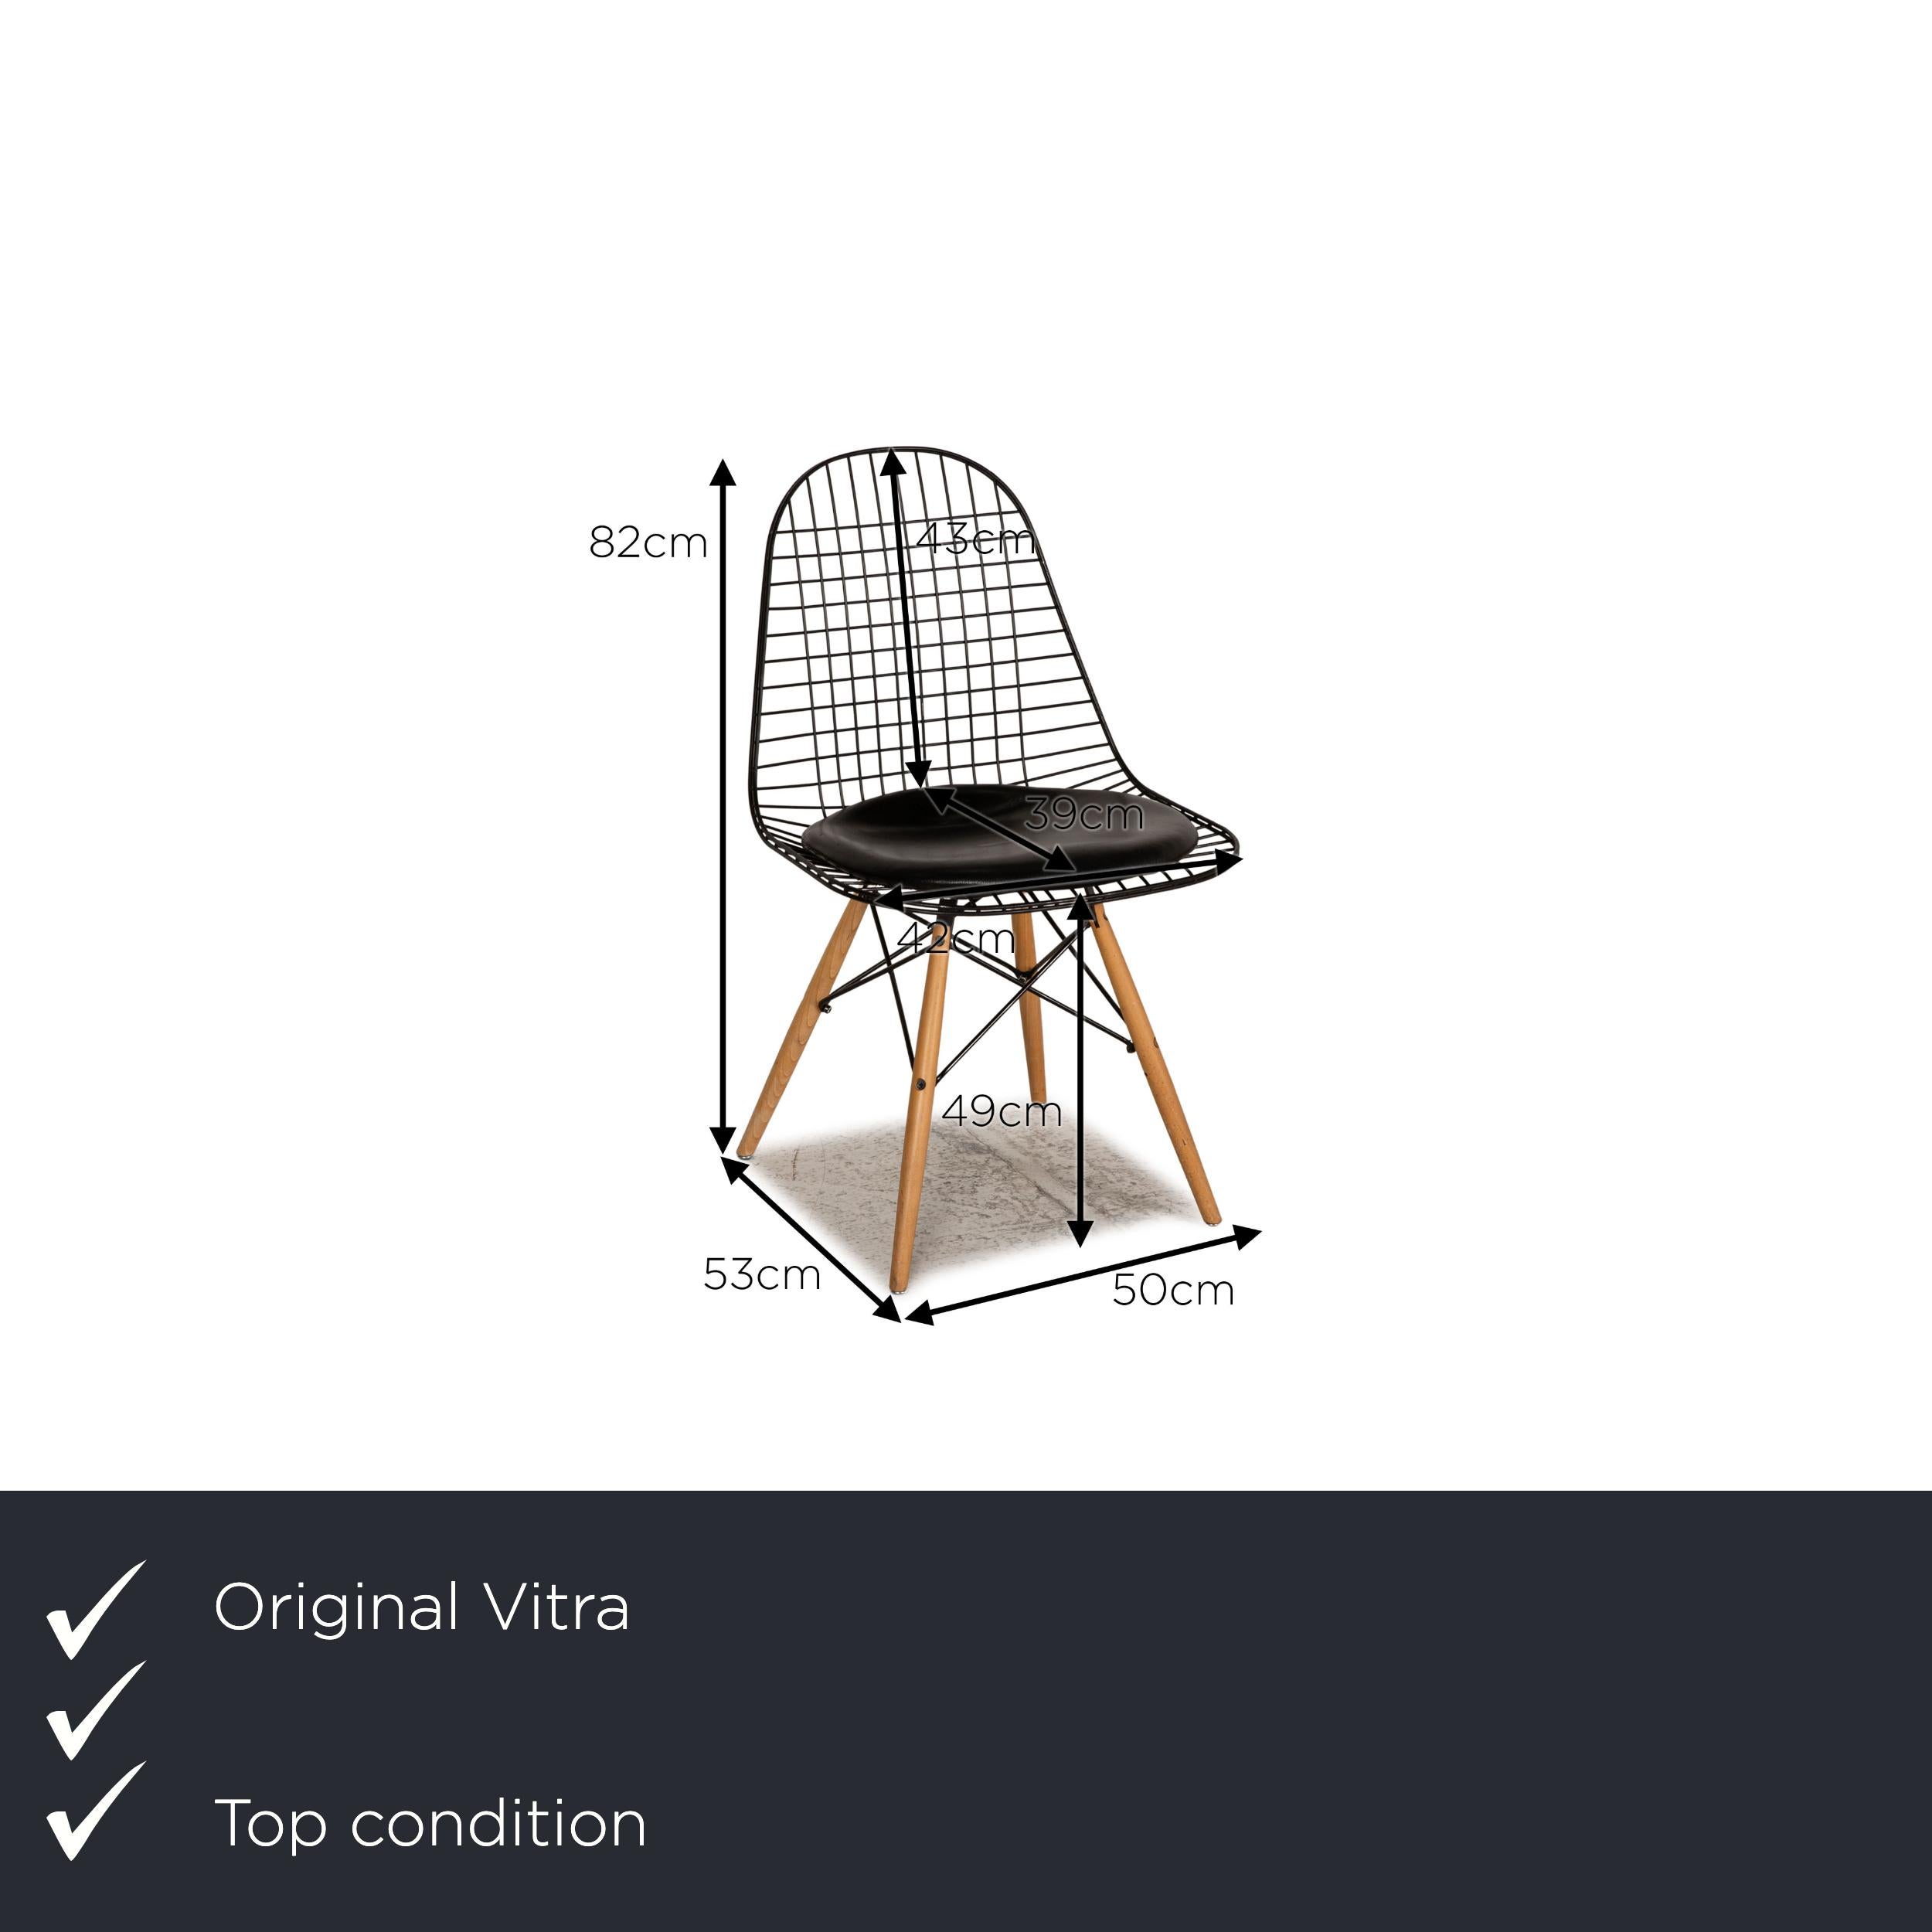 We present to you a Vitra chair metal chair black.

Product measurements in centimeters:

depth: 53
width: 50
height: 82
seat height: 49
rest height: 
seat depth: 39
seat width: 42
back height: 43.

 